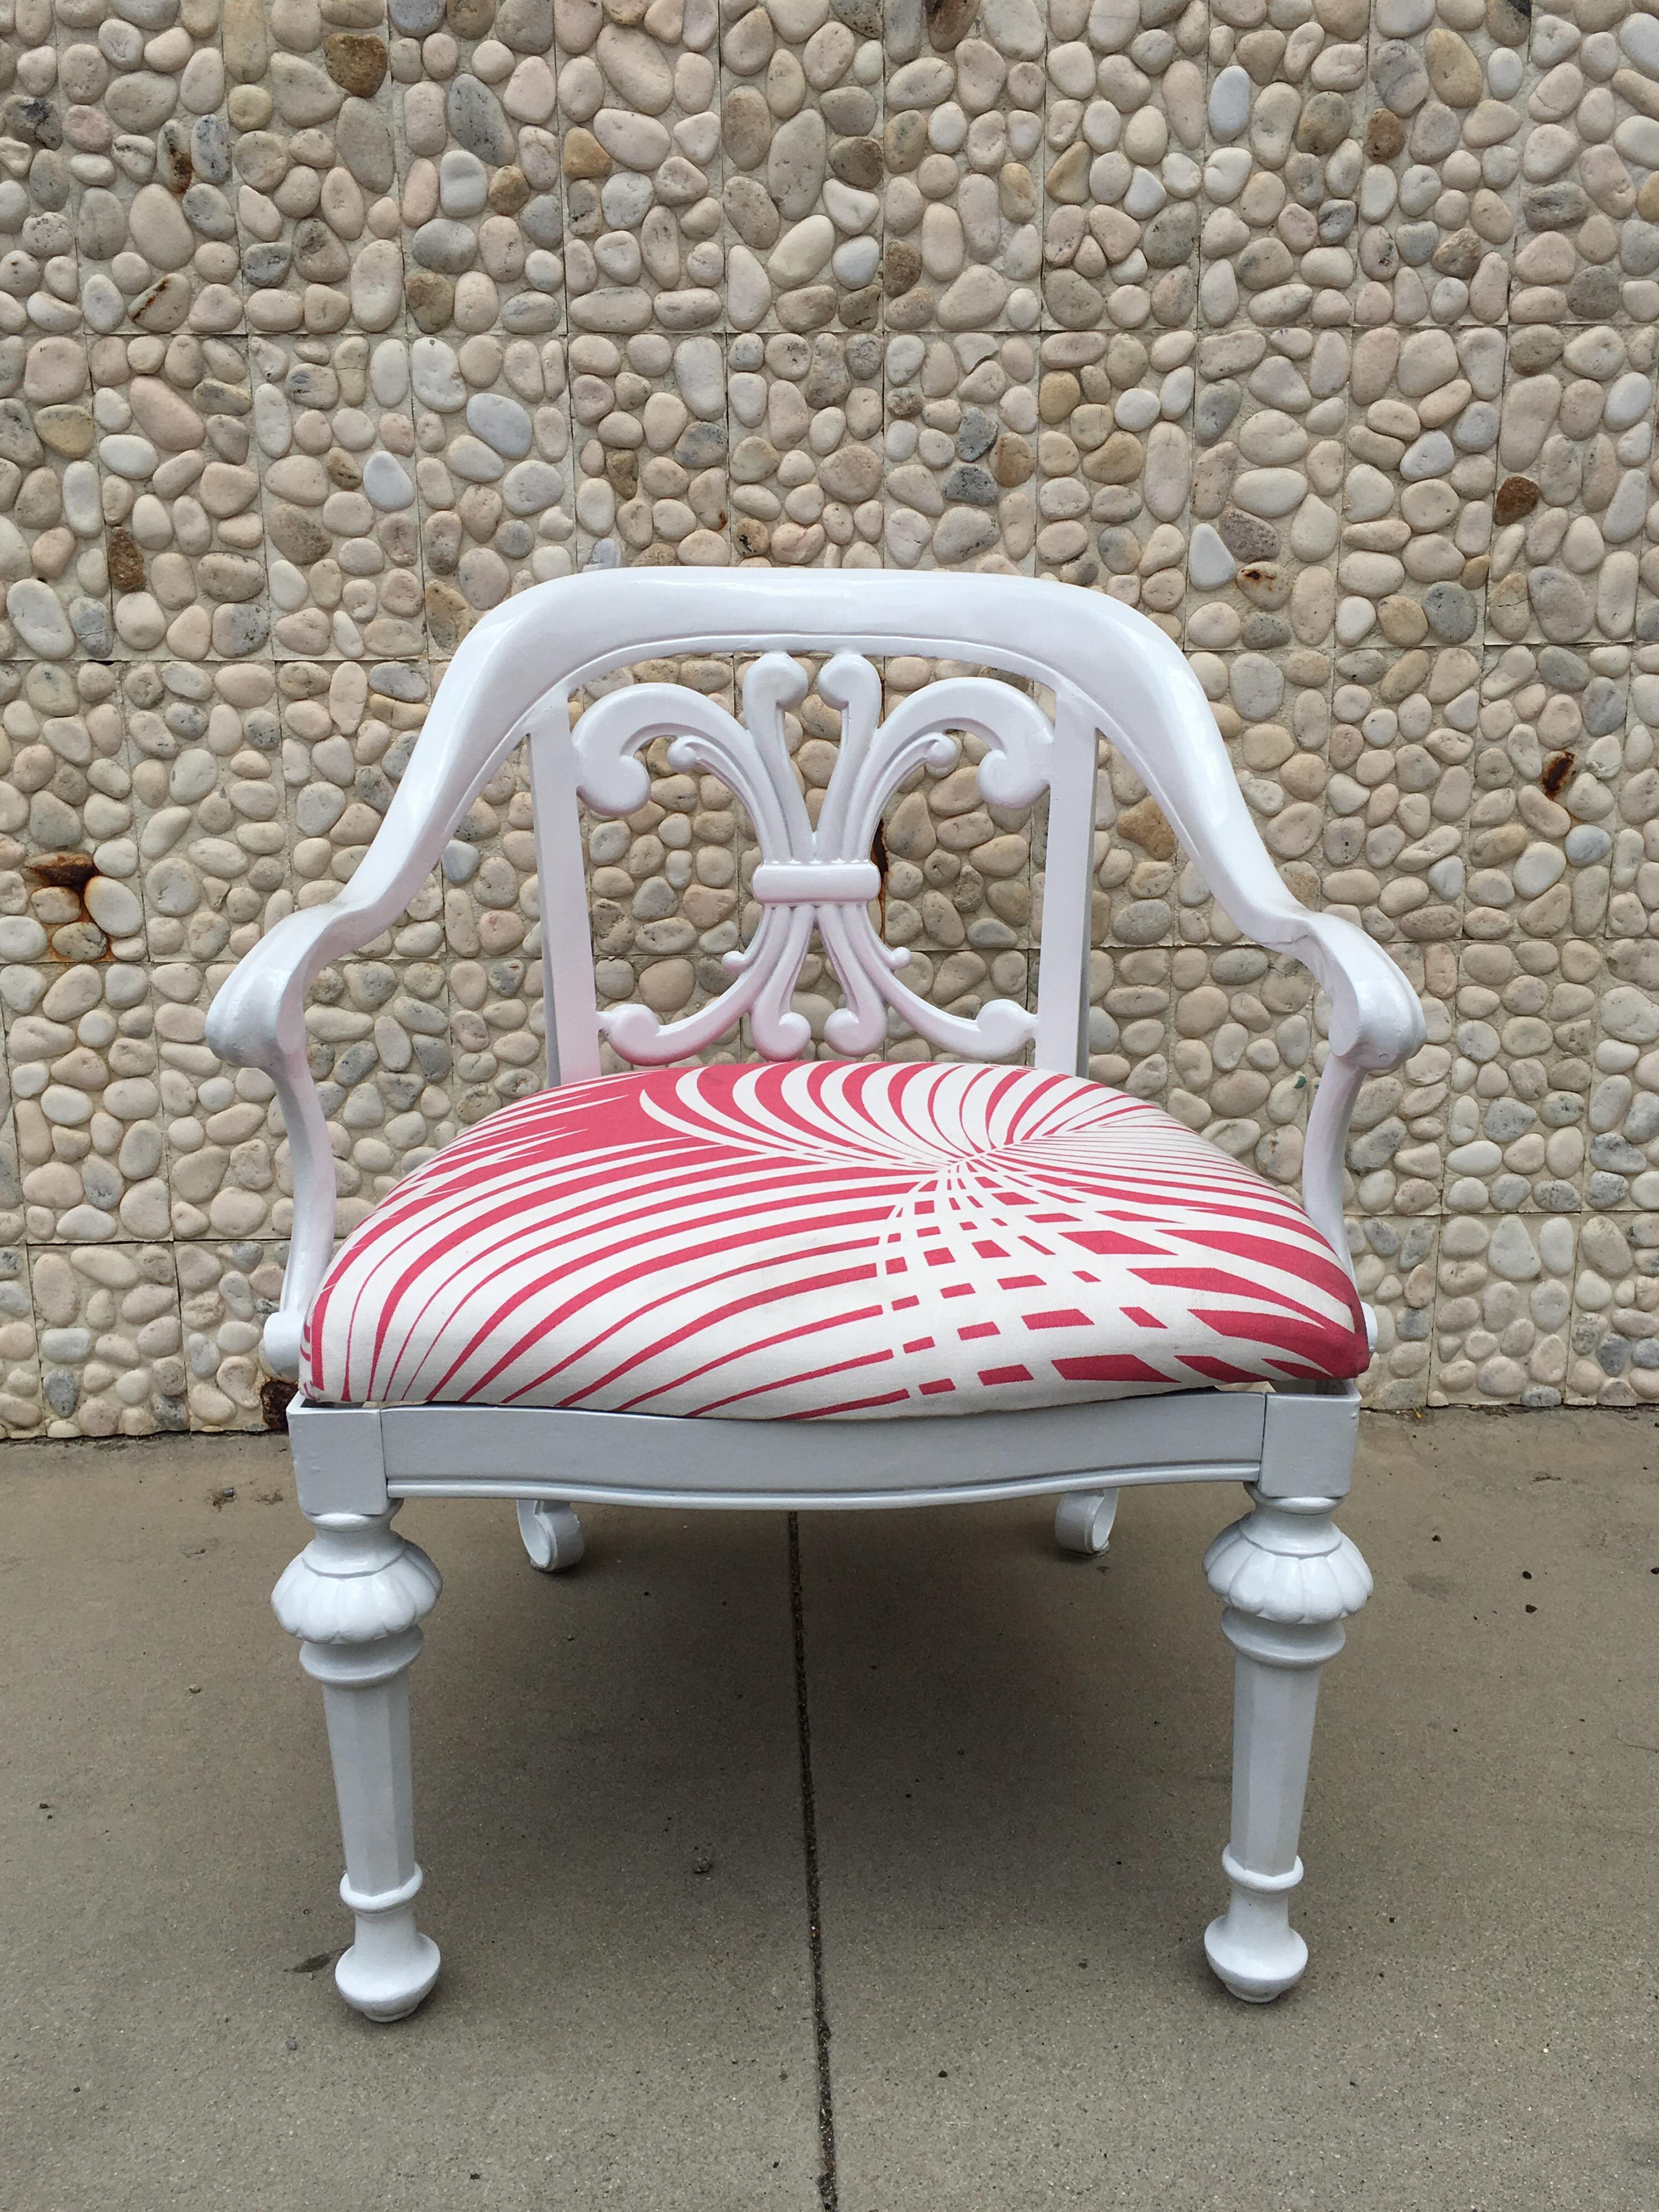 A set of 4 rare patio chairs designed by Dorothy Draper for Kessler Industries, an American company. This set has a matching table available separately. Very Hollywood Regency Glamour. Recently redone in high gloss white. New tropical Hot Pink and